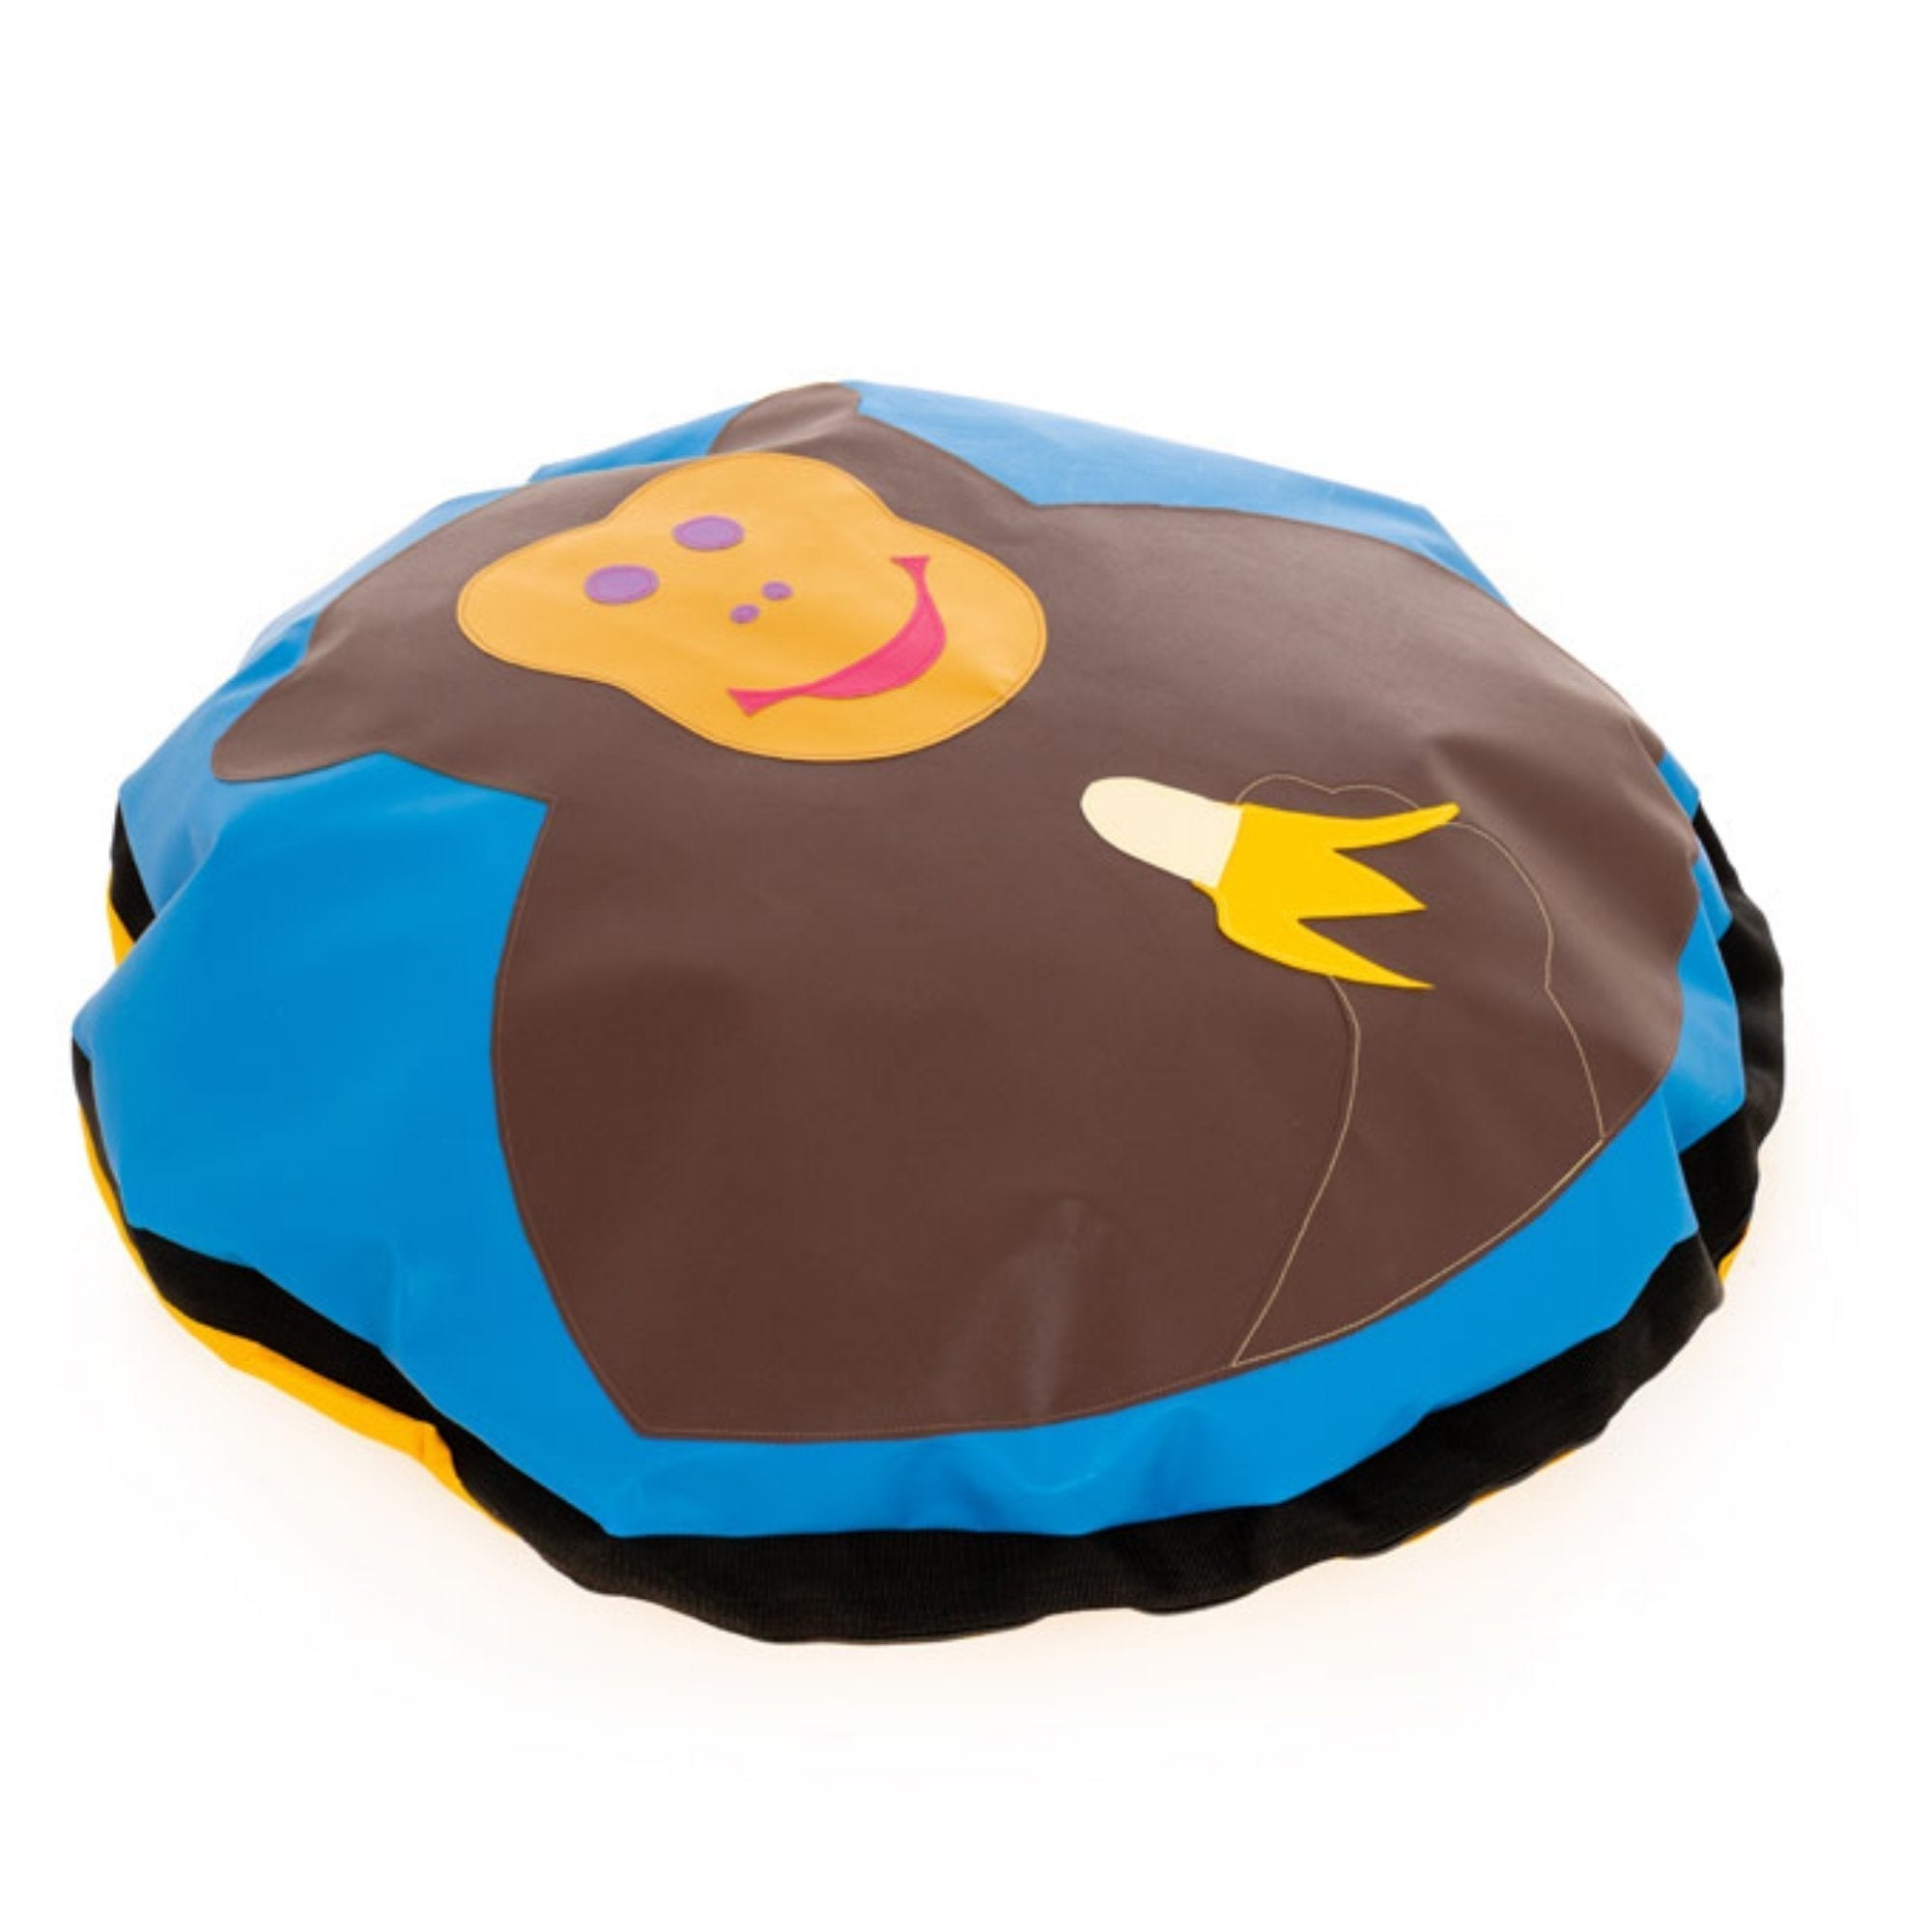 Marvin the Monkey Animal Bean Bag, Meet Marvin the Monkey Animal Bean Bag: Your Child's Comfy Companion and Teacher Marvin the Monkey is here to turn your nursery into a delightful haven of learning and relaxation with the Marvin the Monkey Animal Bean Bag. This charming and lovable monkey-themed bean bag isn't just a cozy seating solution; it's also an engaging educational tool that introduces children to the world of animals, nurtures relationships, and sparks environmental awareness. Key Features: Educat